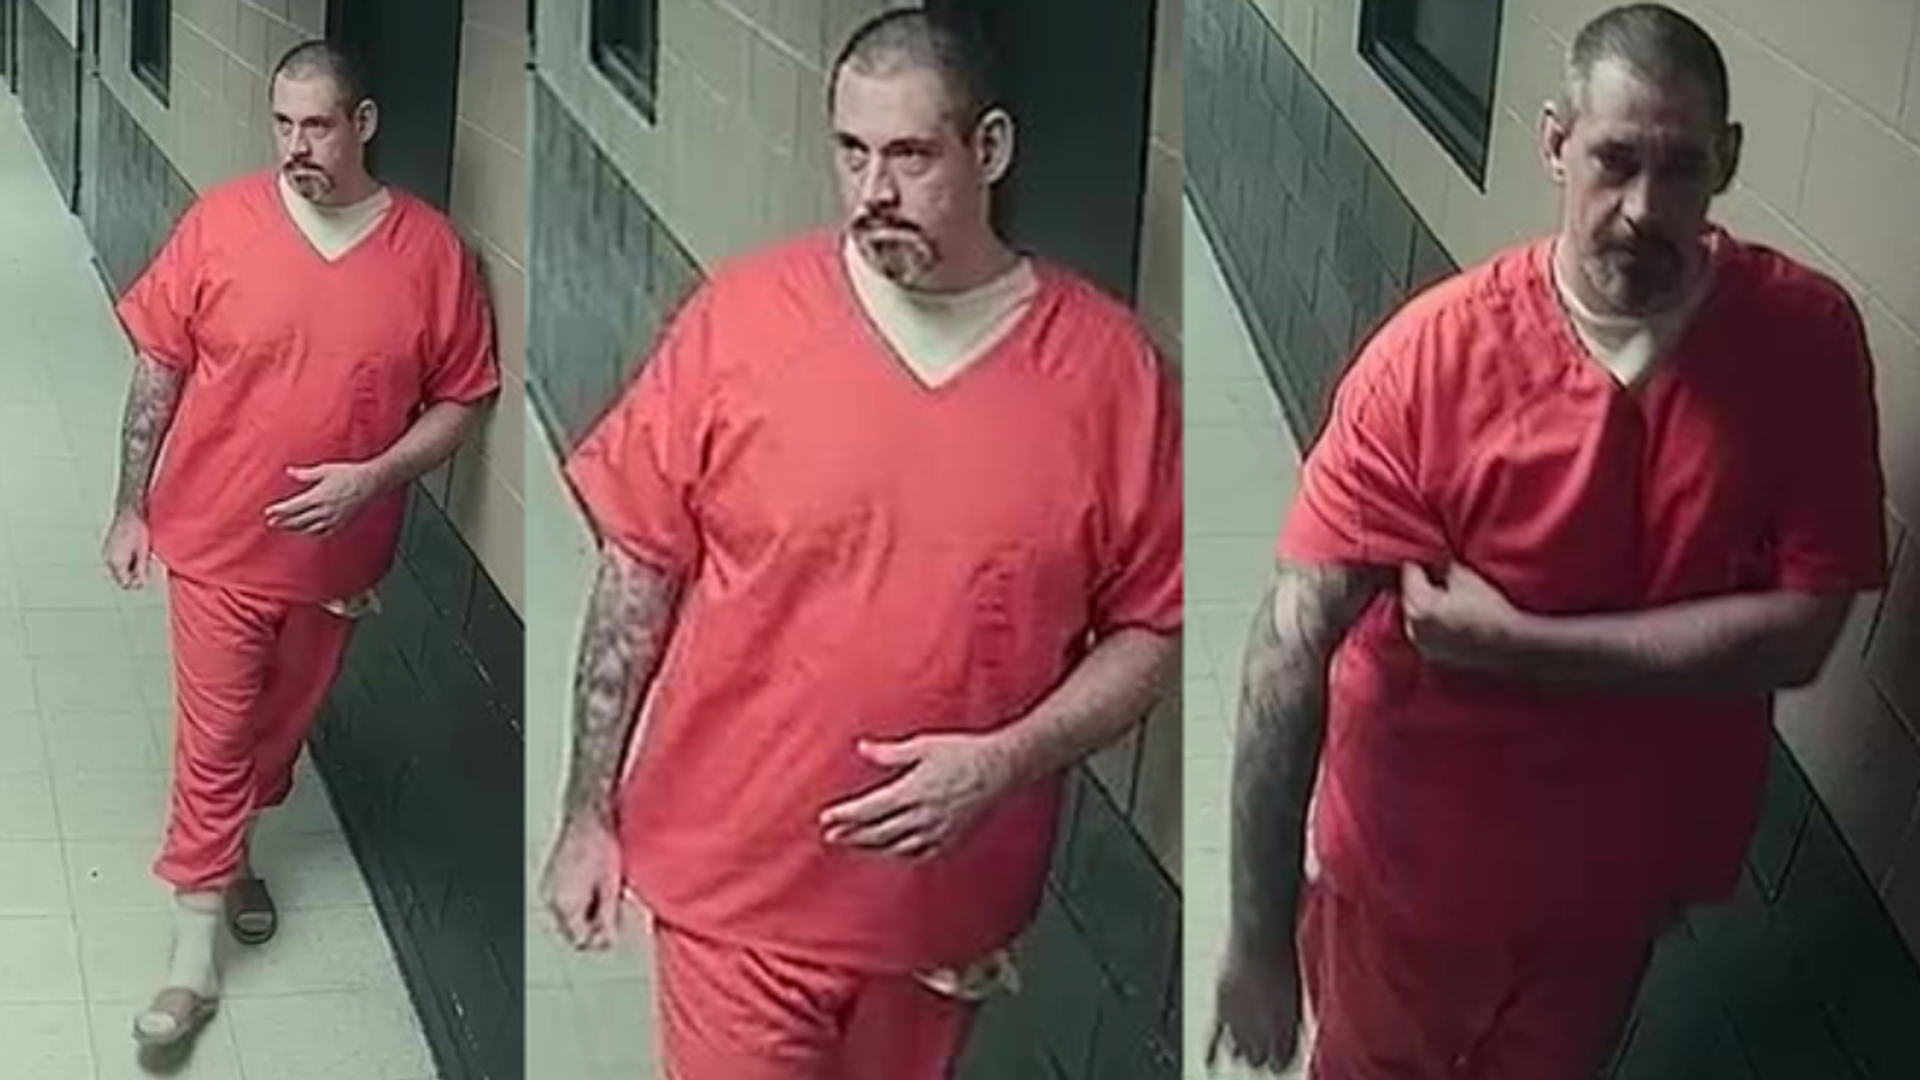 Photos released by the Lauderdale County Sheriff's Office show escaped capital murder suspect, Casey Cole White, who is considered to be armed and dangerous. 
The 6'9 tall man weighs in at approximately 270 pounds (122.5 kilograms).  - Sputnik International, 1920, 02.05.2022